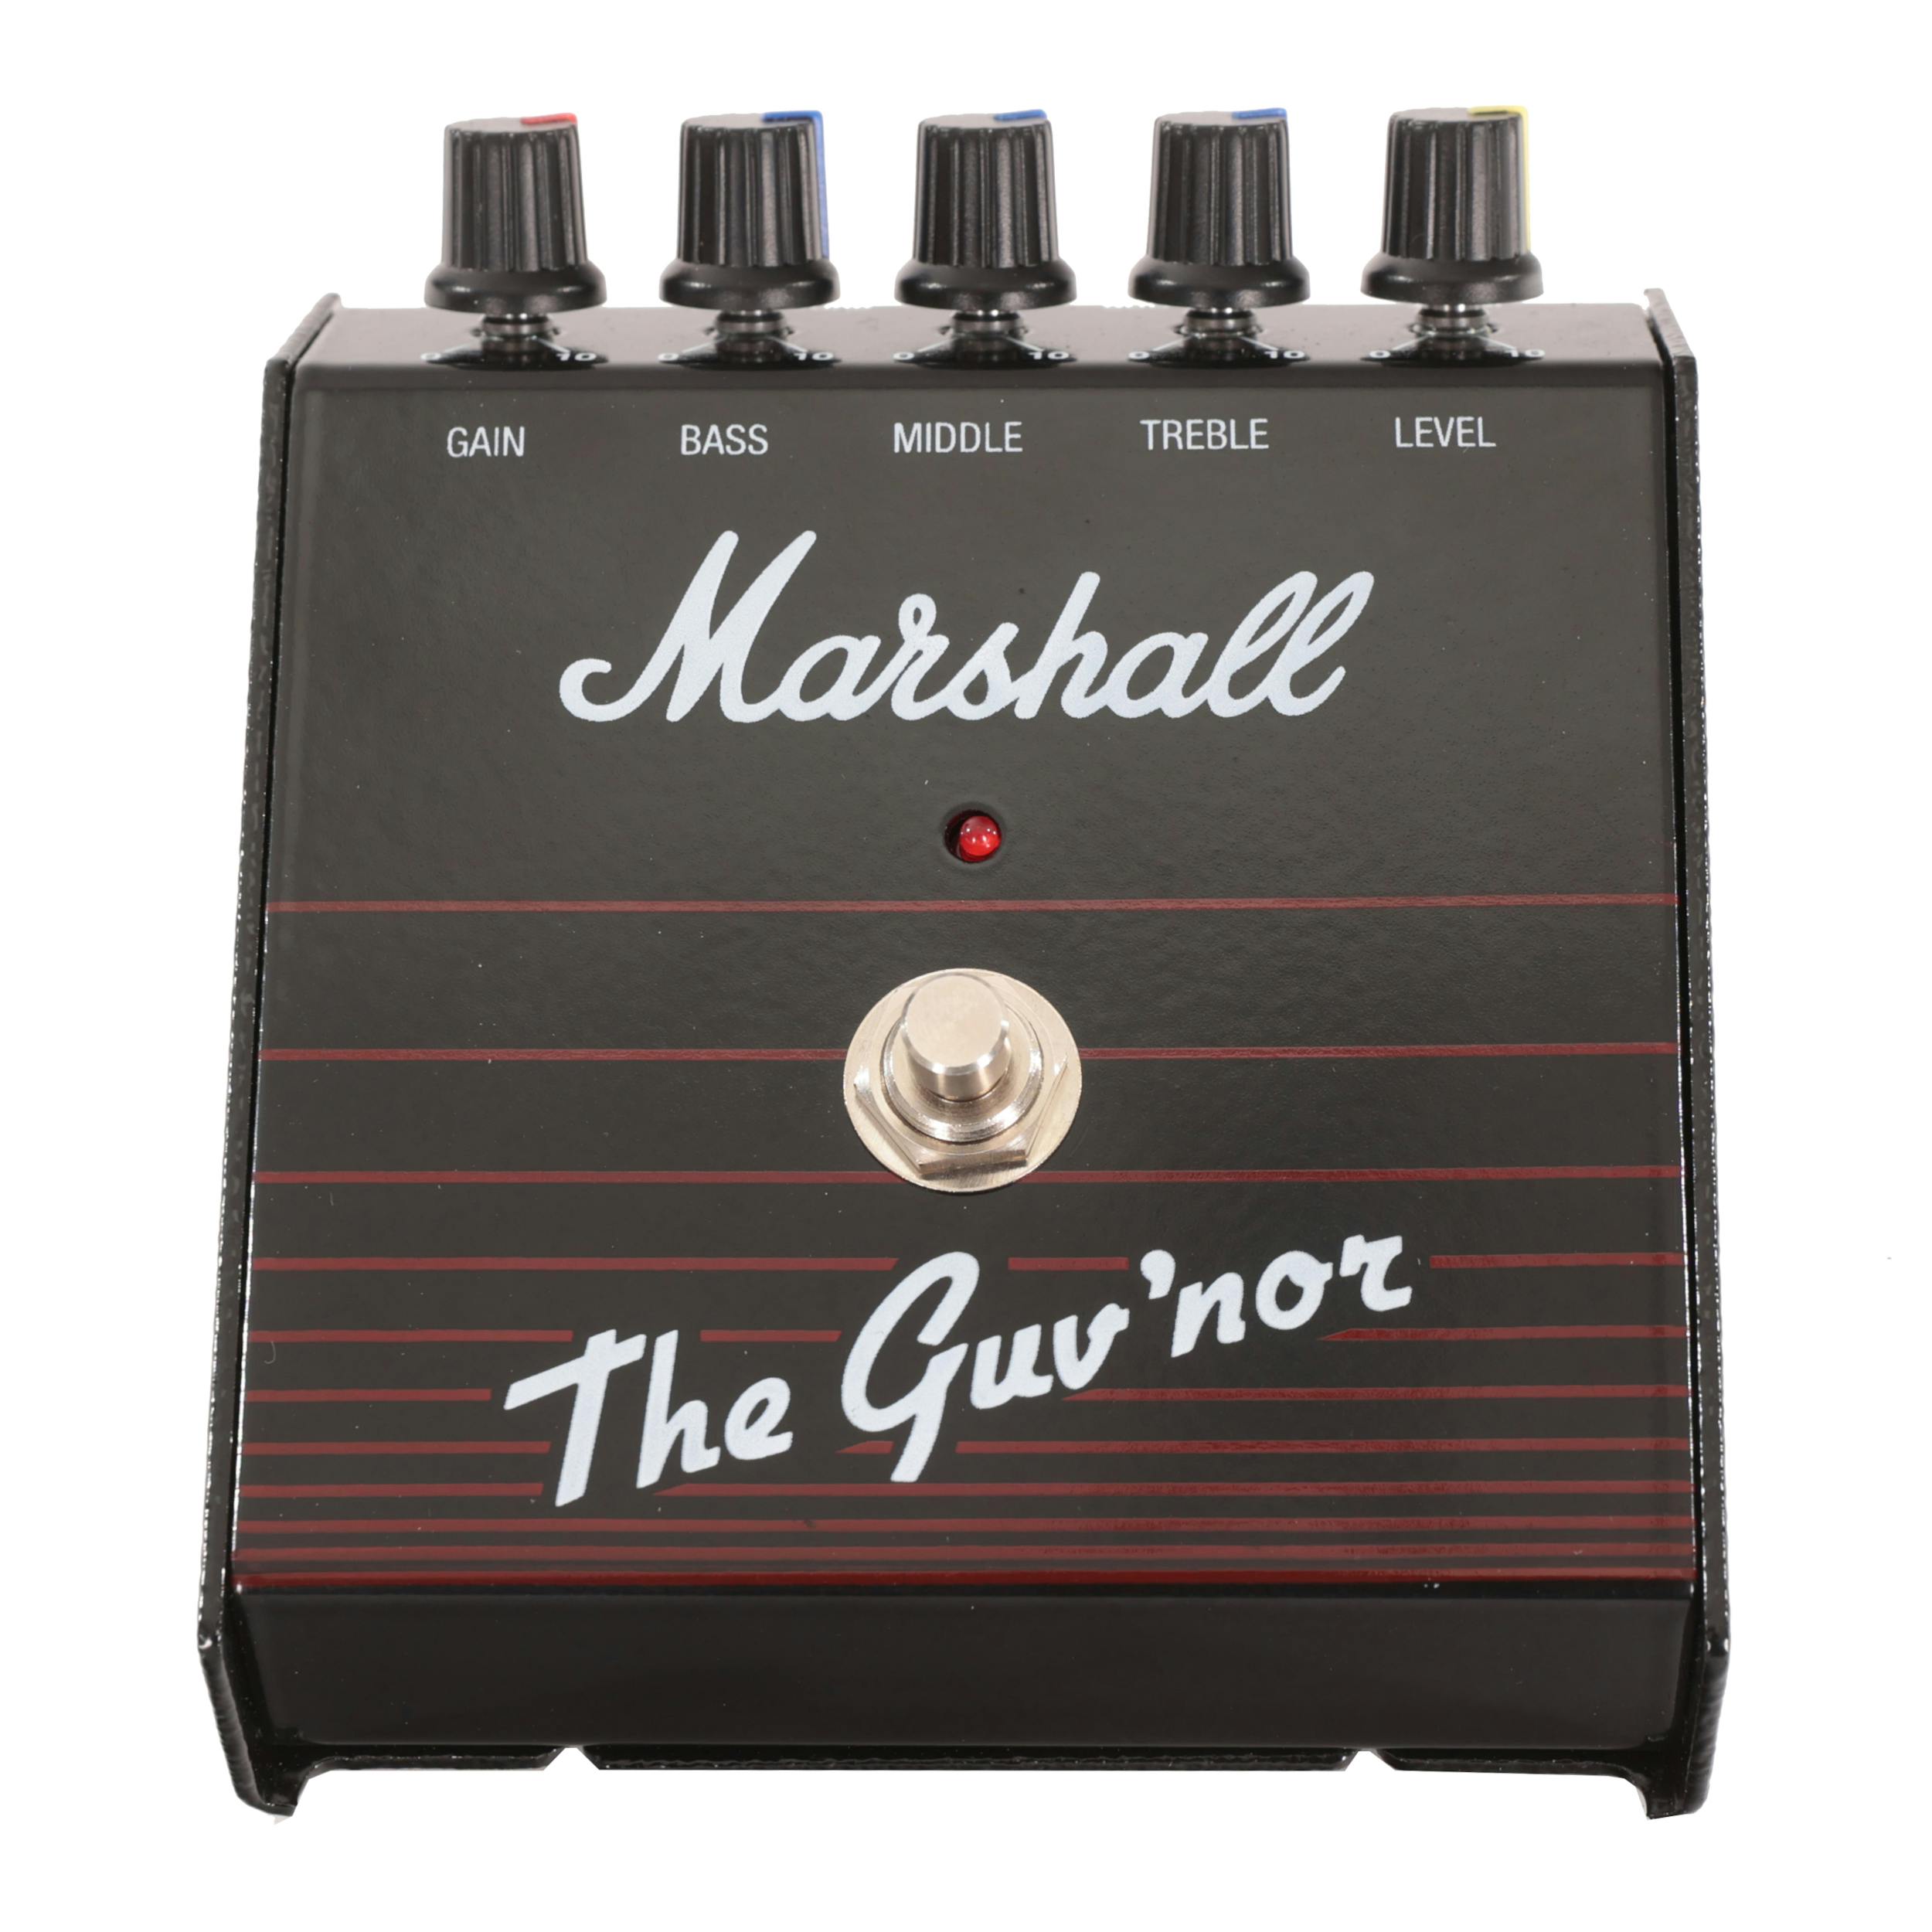 Marshall The Guv'nor 動作良好 箱付き - 器材